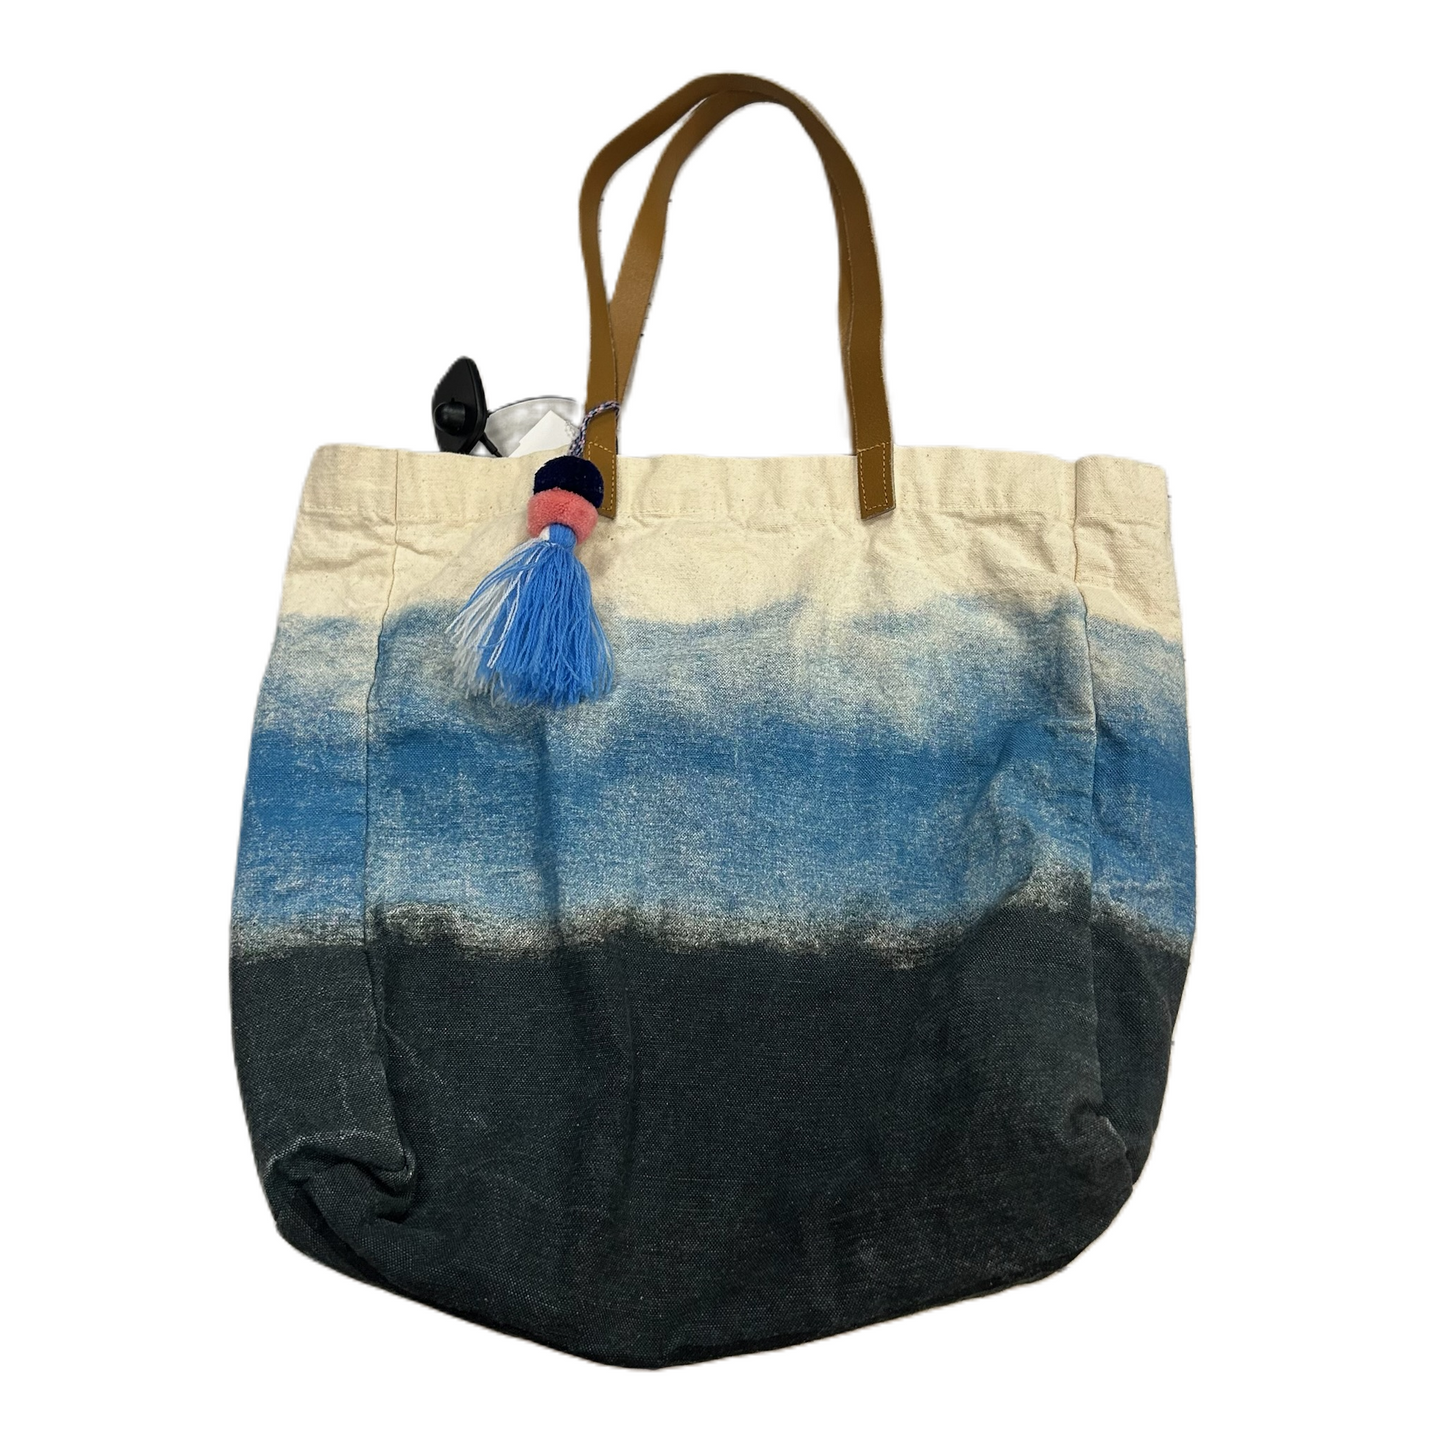 Tote By Clothes Mentor, Size: Small